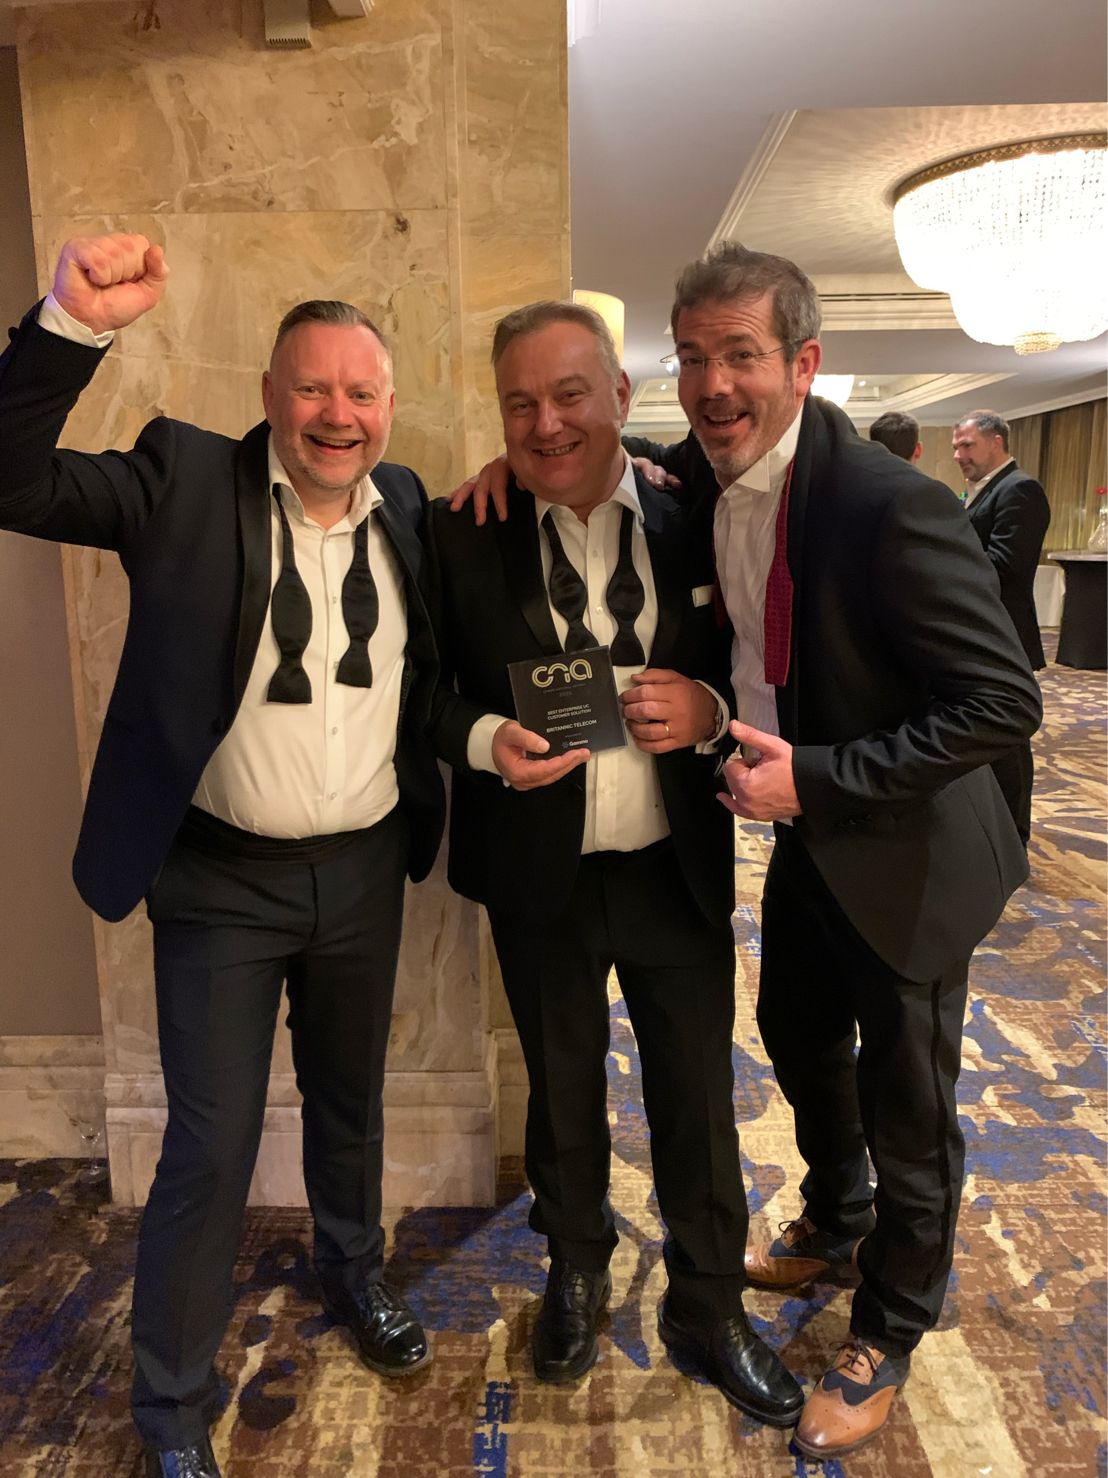 Andrew Nash - Operations Director, Jonathan Sharp - Sales and Marketing Director and Gill Ide - Head of Digital Shift celebrating the 2021 CNA award for best Enterprise UC Customer Solution